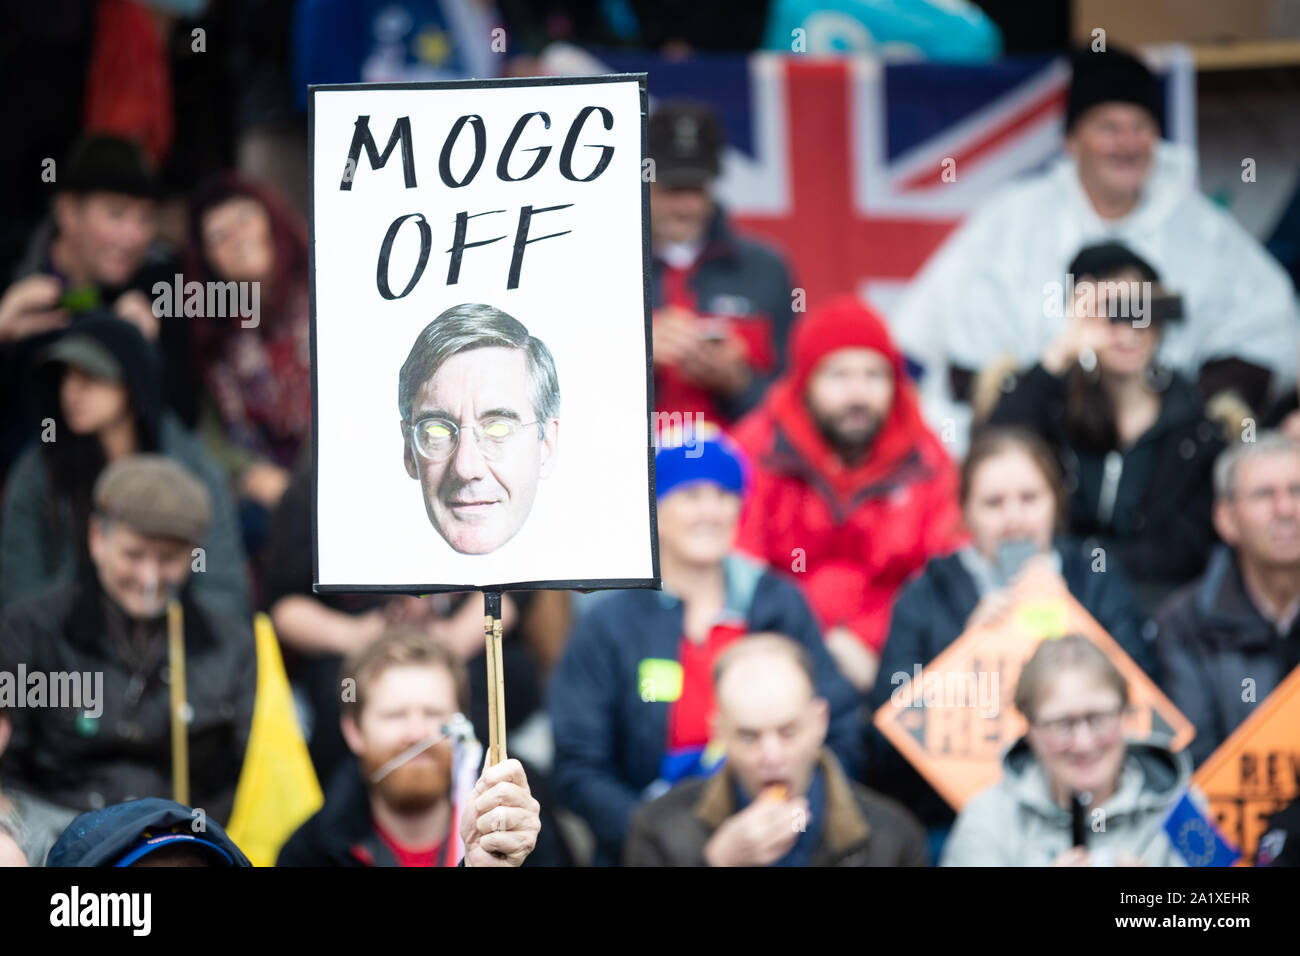 Manchester, UK. 29 September, 2019. Thousands of stop-Brexit demonstrators marched through the city and past the Conservative Party Conference this afternoon. Reject-Brexit supporters from across the country came in response to the anger felt towards the current political situation around Brexit. Andy Barton/Alamy Live News Stock Photo